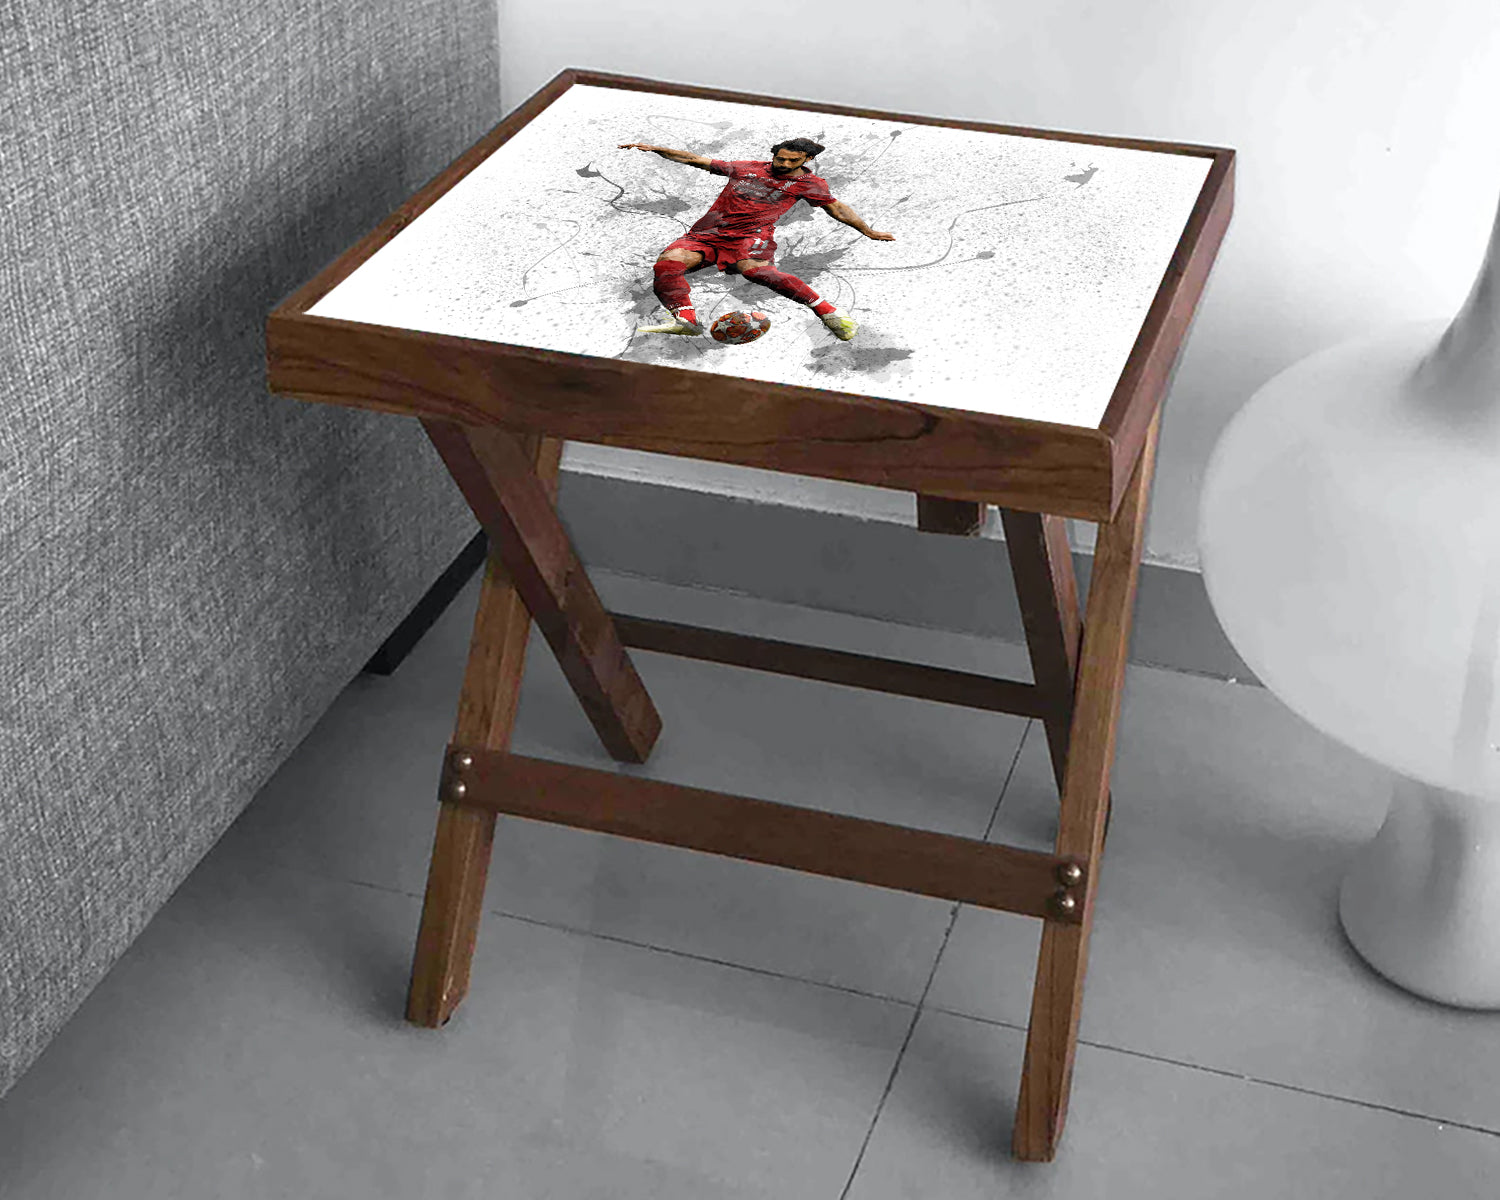 Mohamed Salah Splash Effect Coffee and Laptop Table 